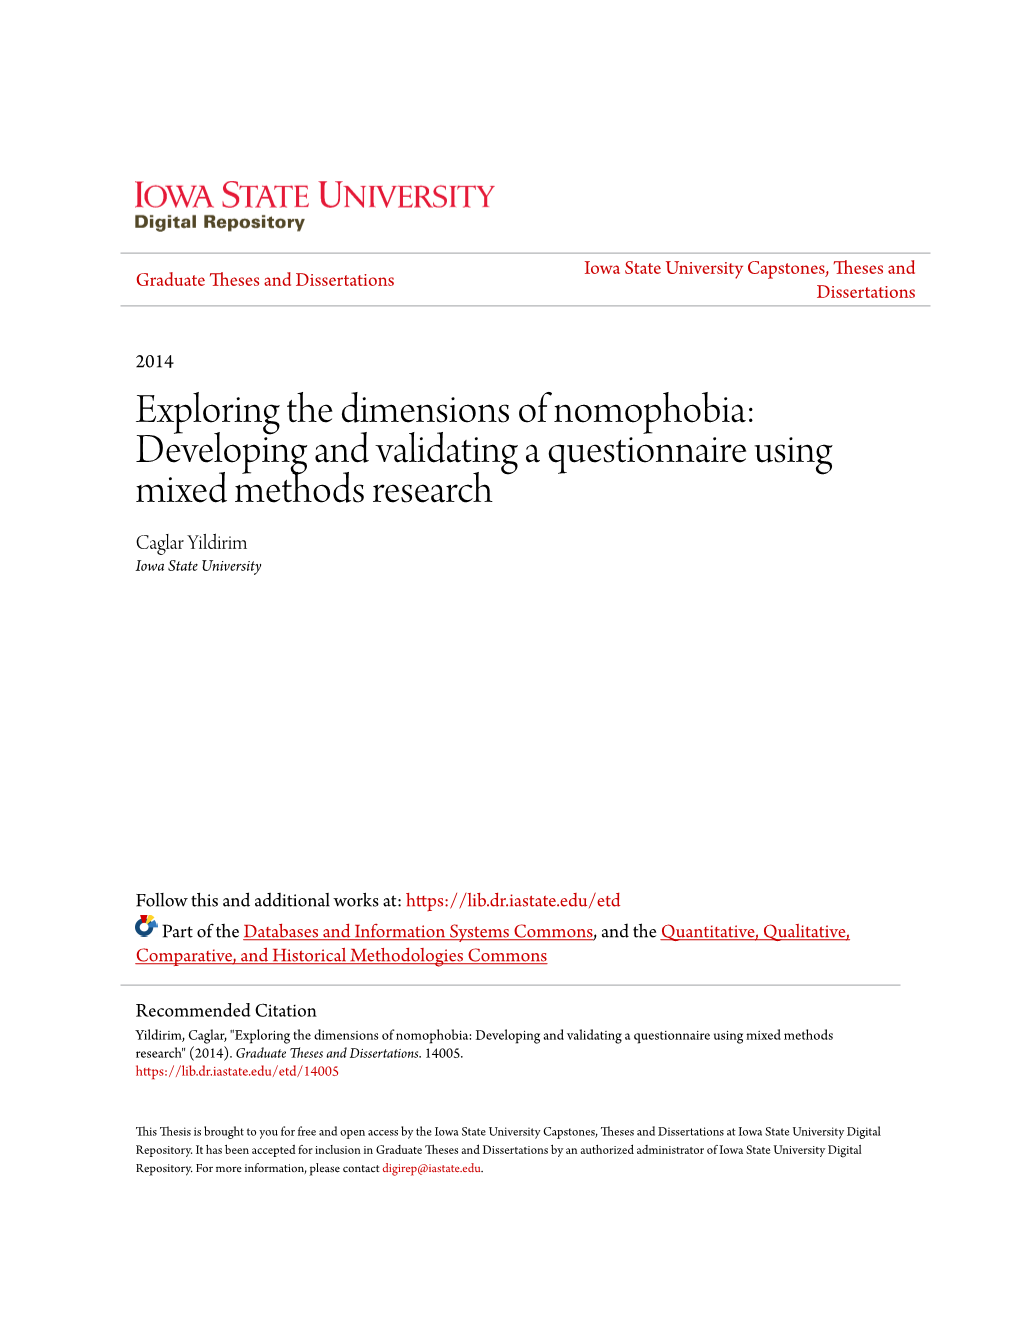 Exploring the Dimensions of Nomophobia: Developing and Validating a Questionnaire Using Mixed Methods Research Caglar Yildirim Iowa State University